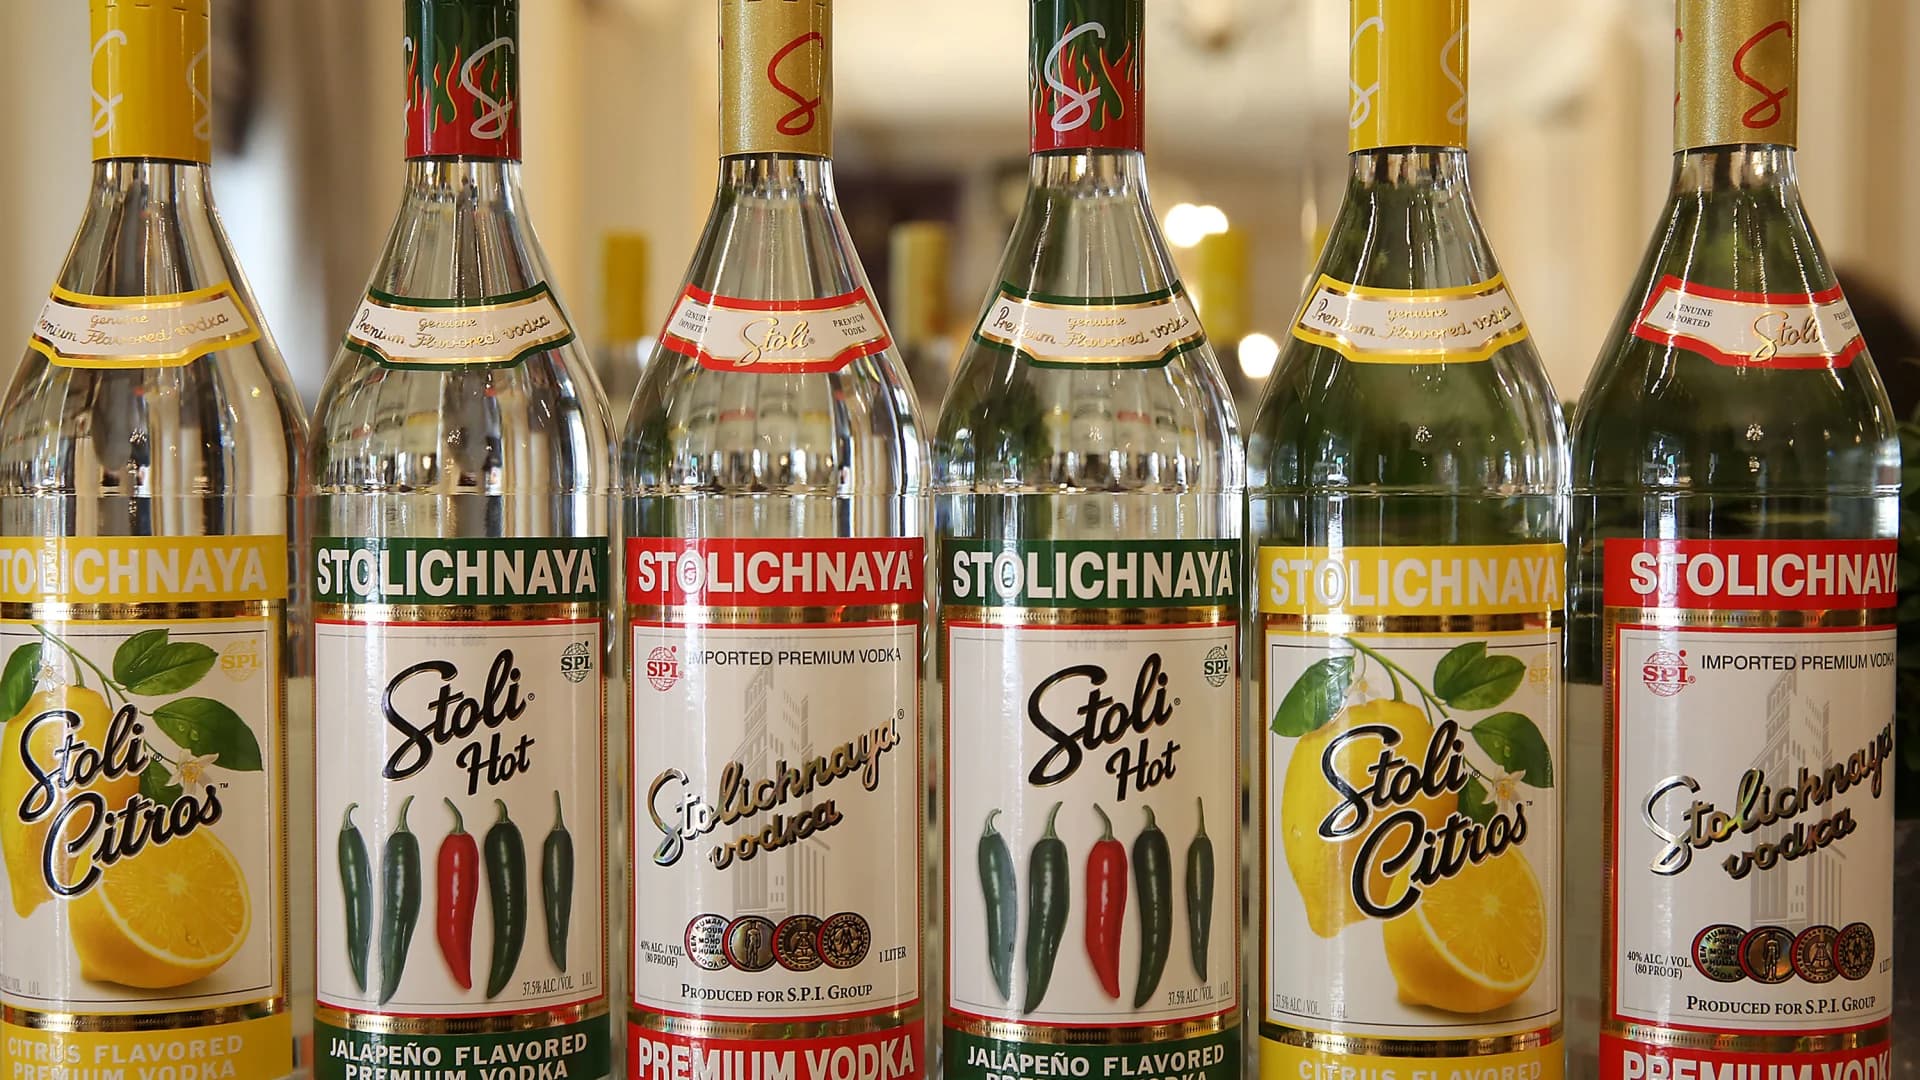 Stoli vodka to rebrand in effort to distance itself from Russia